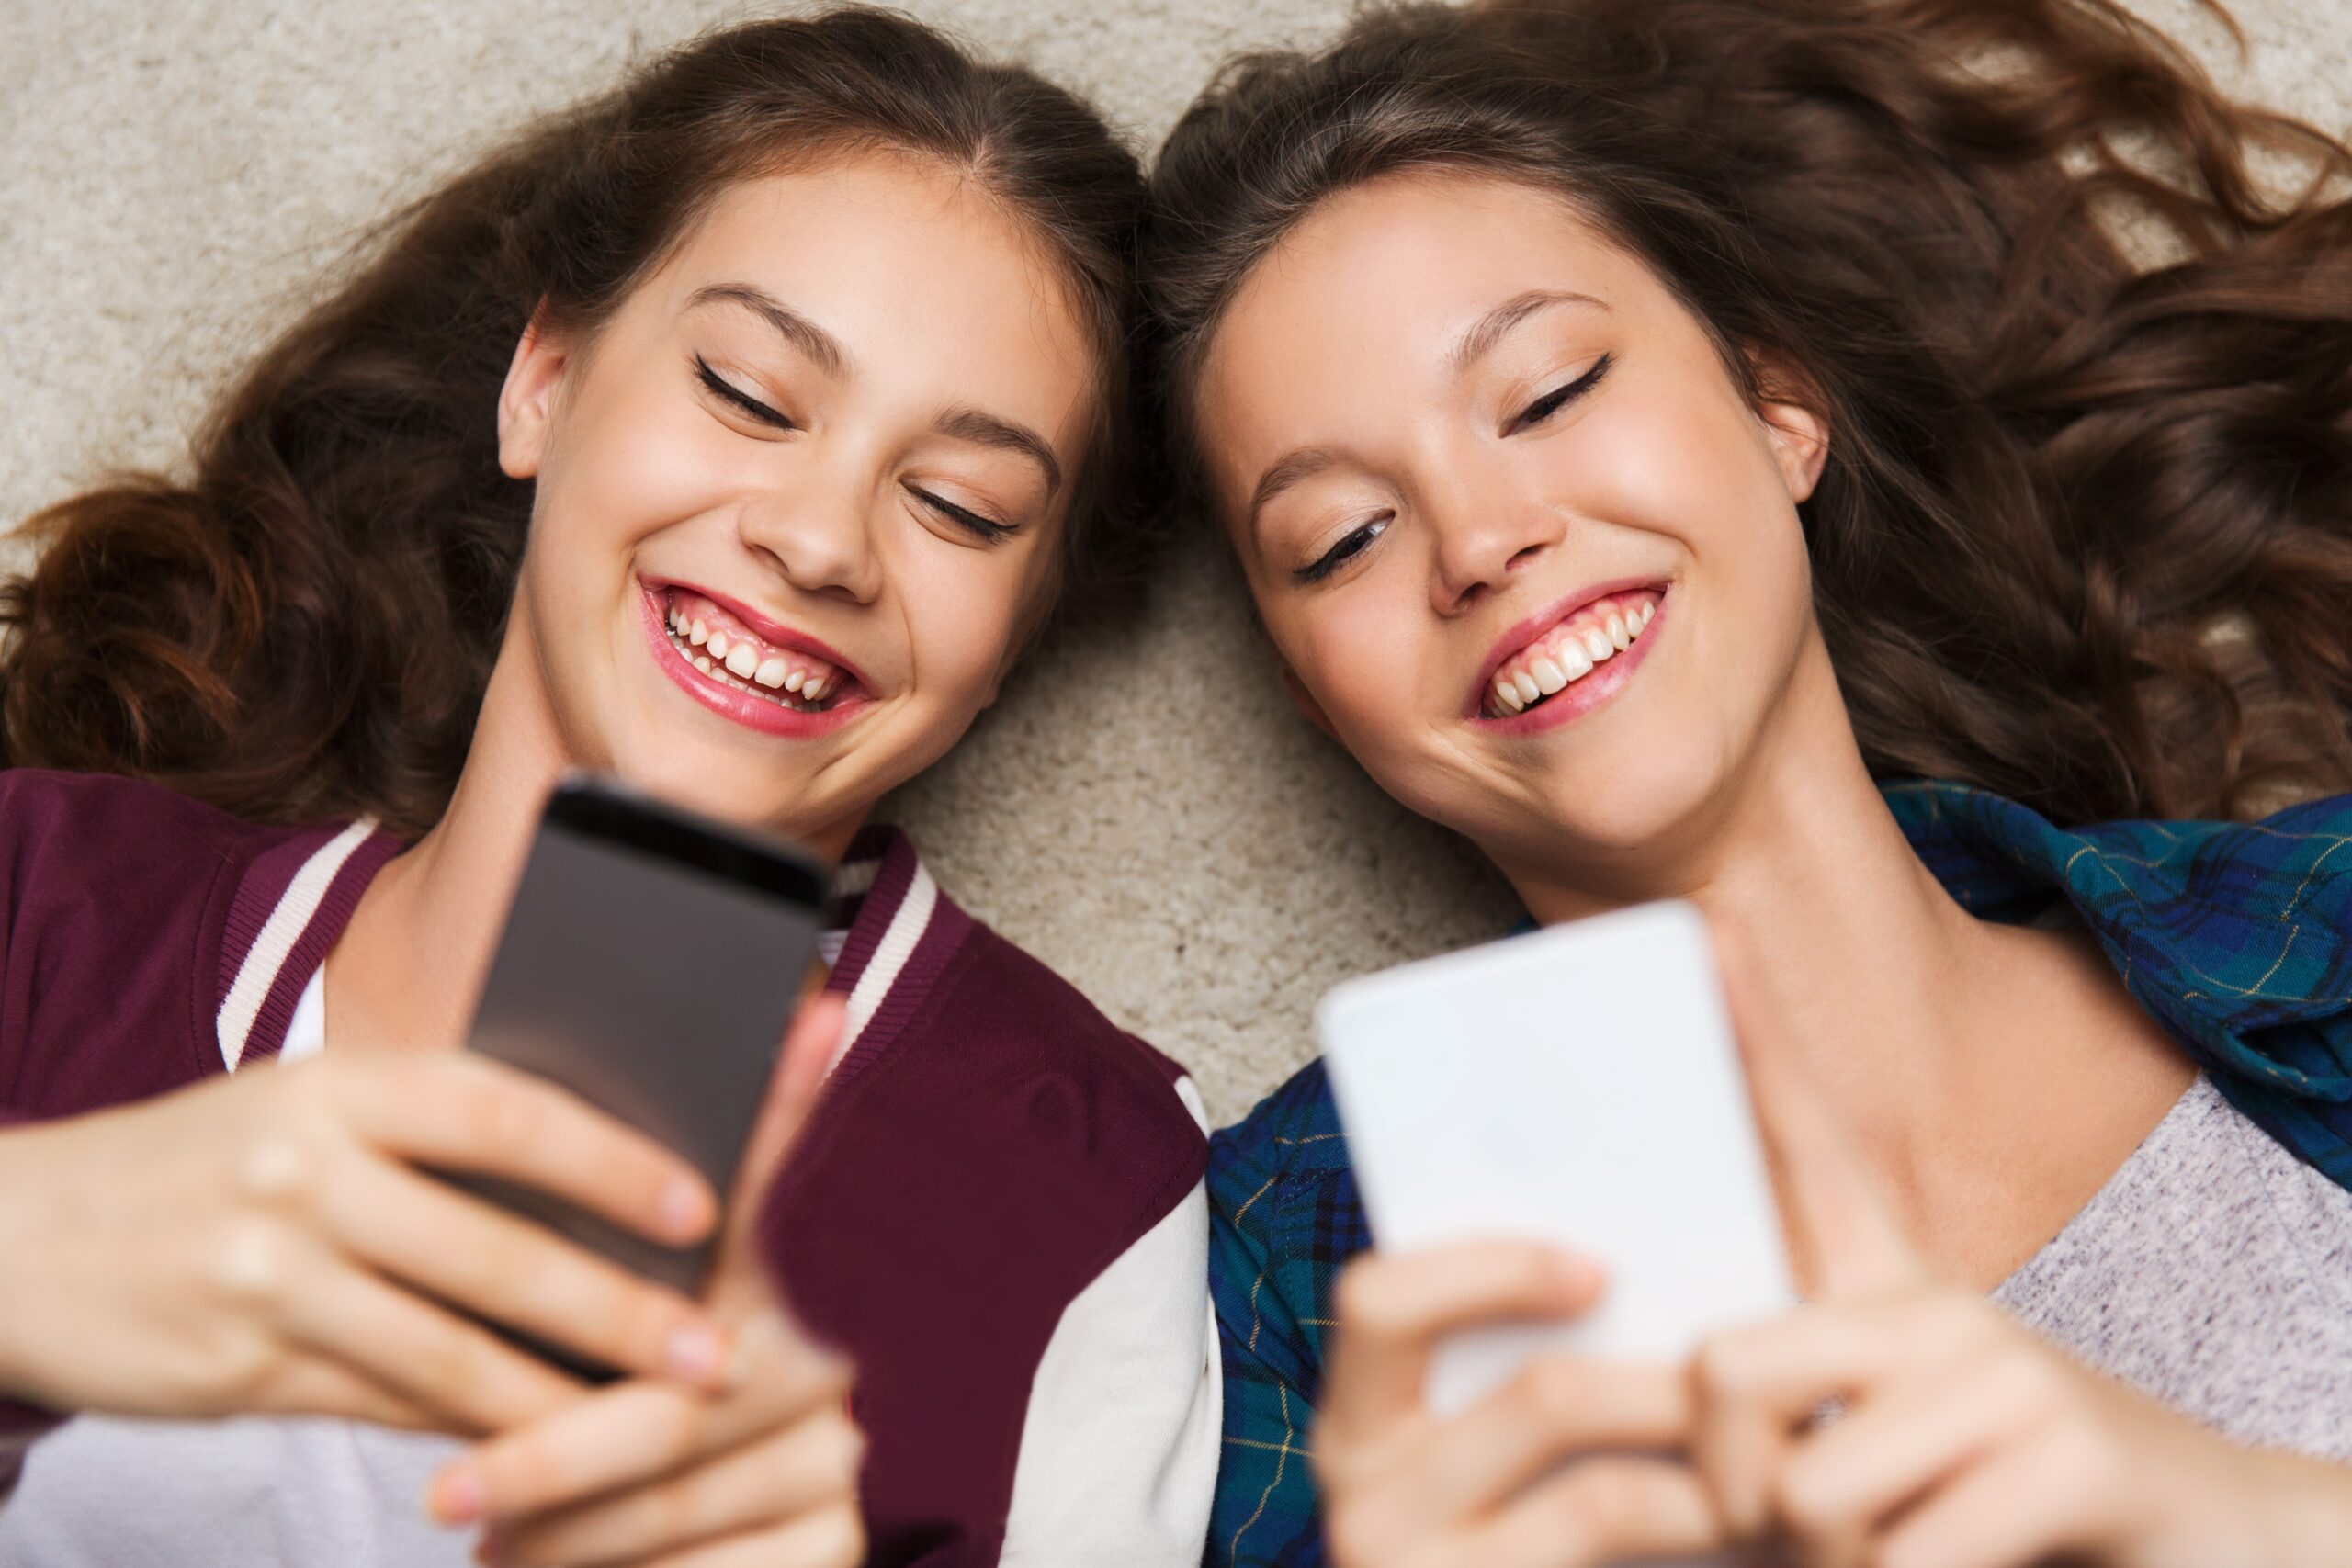 Two smiling teenage girls lying on their backs side by side looking at their smartphones